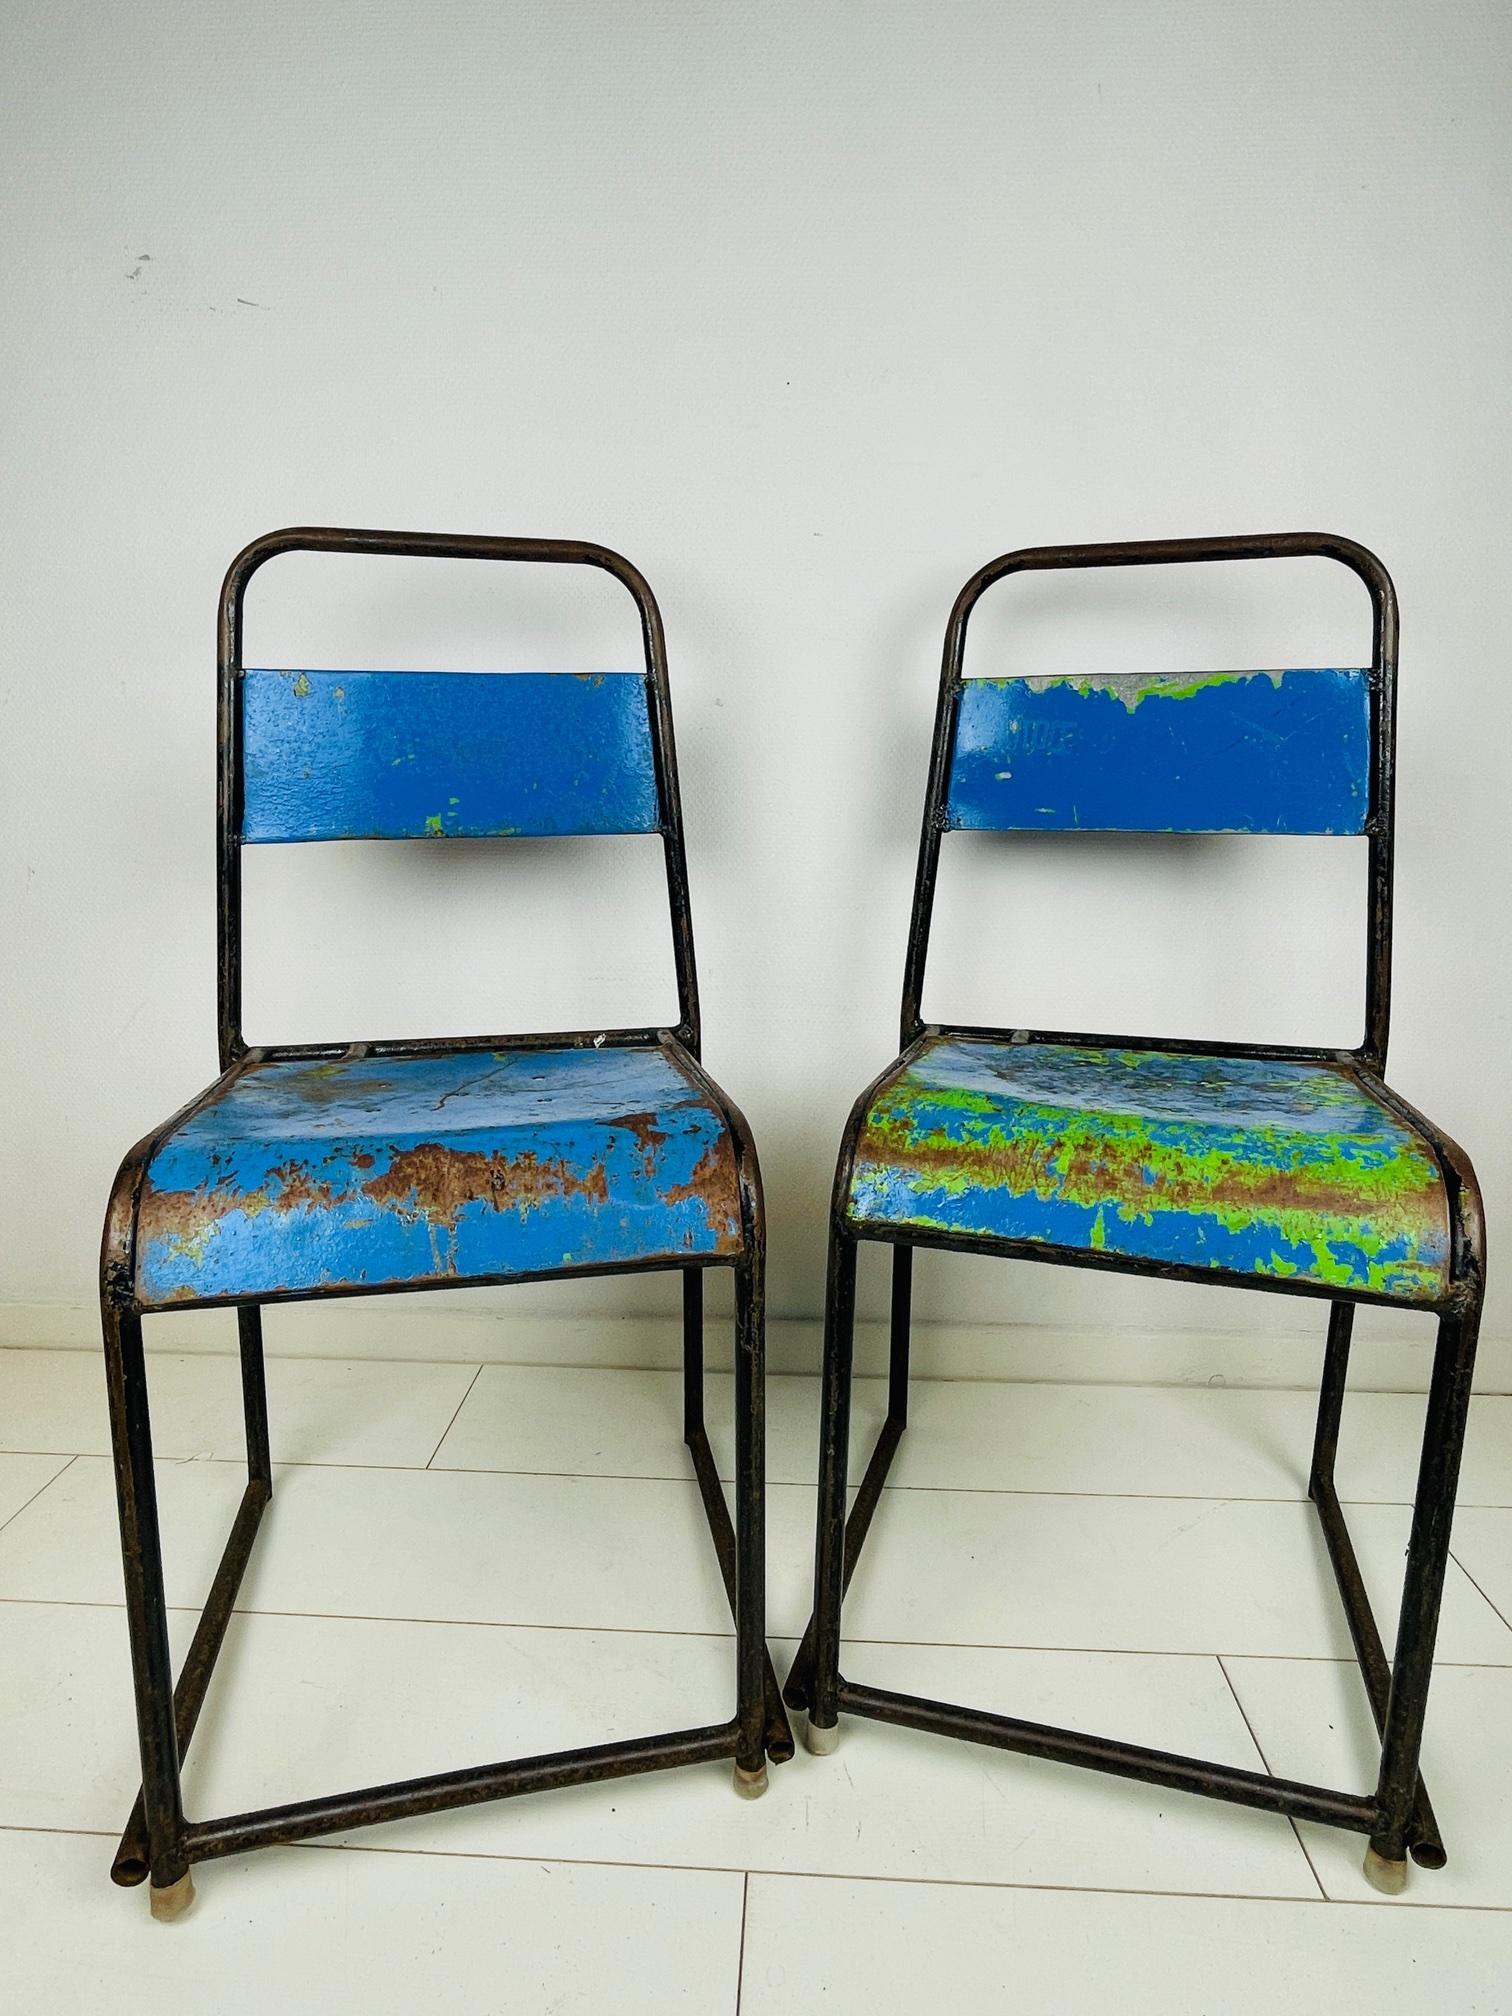 Two beautiful and colourfull outdoor chairs. These chairs are a lust for the aye and perfect for every home, garden, bar of ... beachclub. These chairs just look magnificent in every indoor or outdoor 'interior'. Just imagine sitting on these chairs